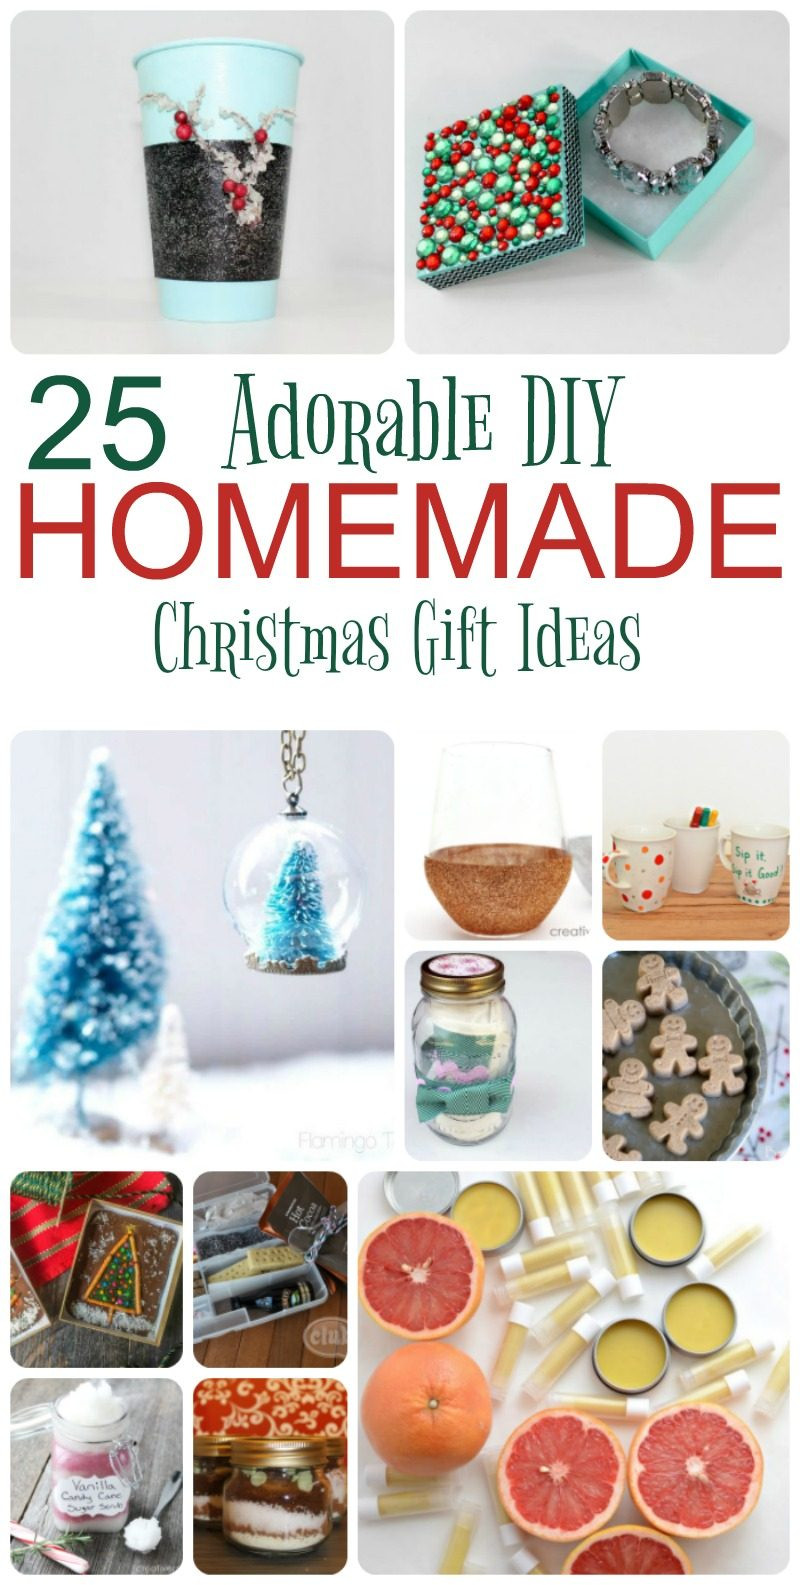 Christmas Gift Ideas For Adults
 25 Adorable Homemade Gifts to Make for Christmas Pretty